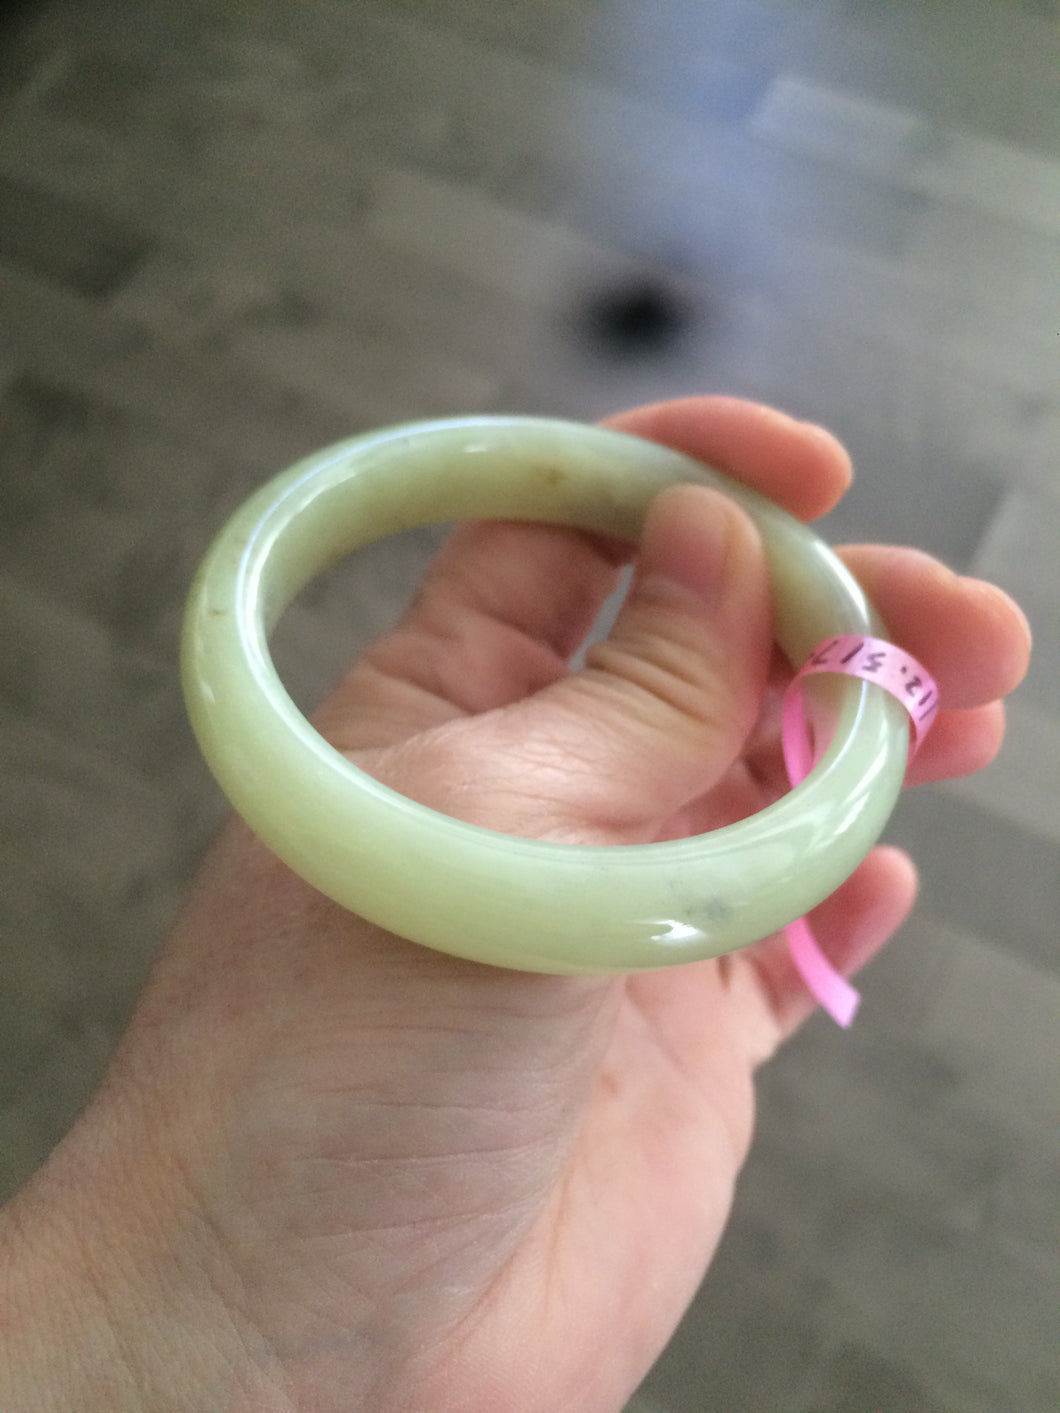 Sale! 54.3 100% Natural yellow/brown super oily nephrite Hetian Jade bangle Y10